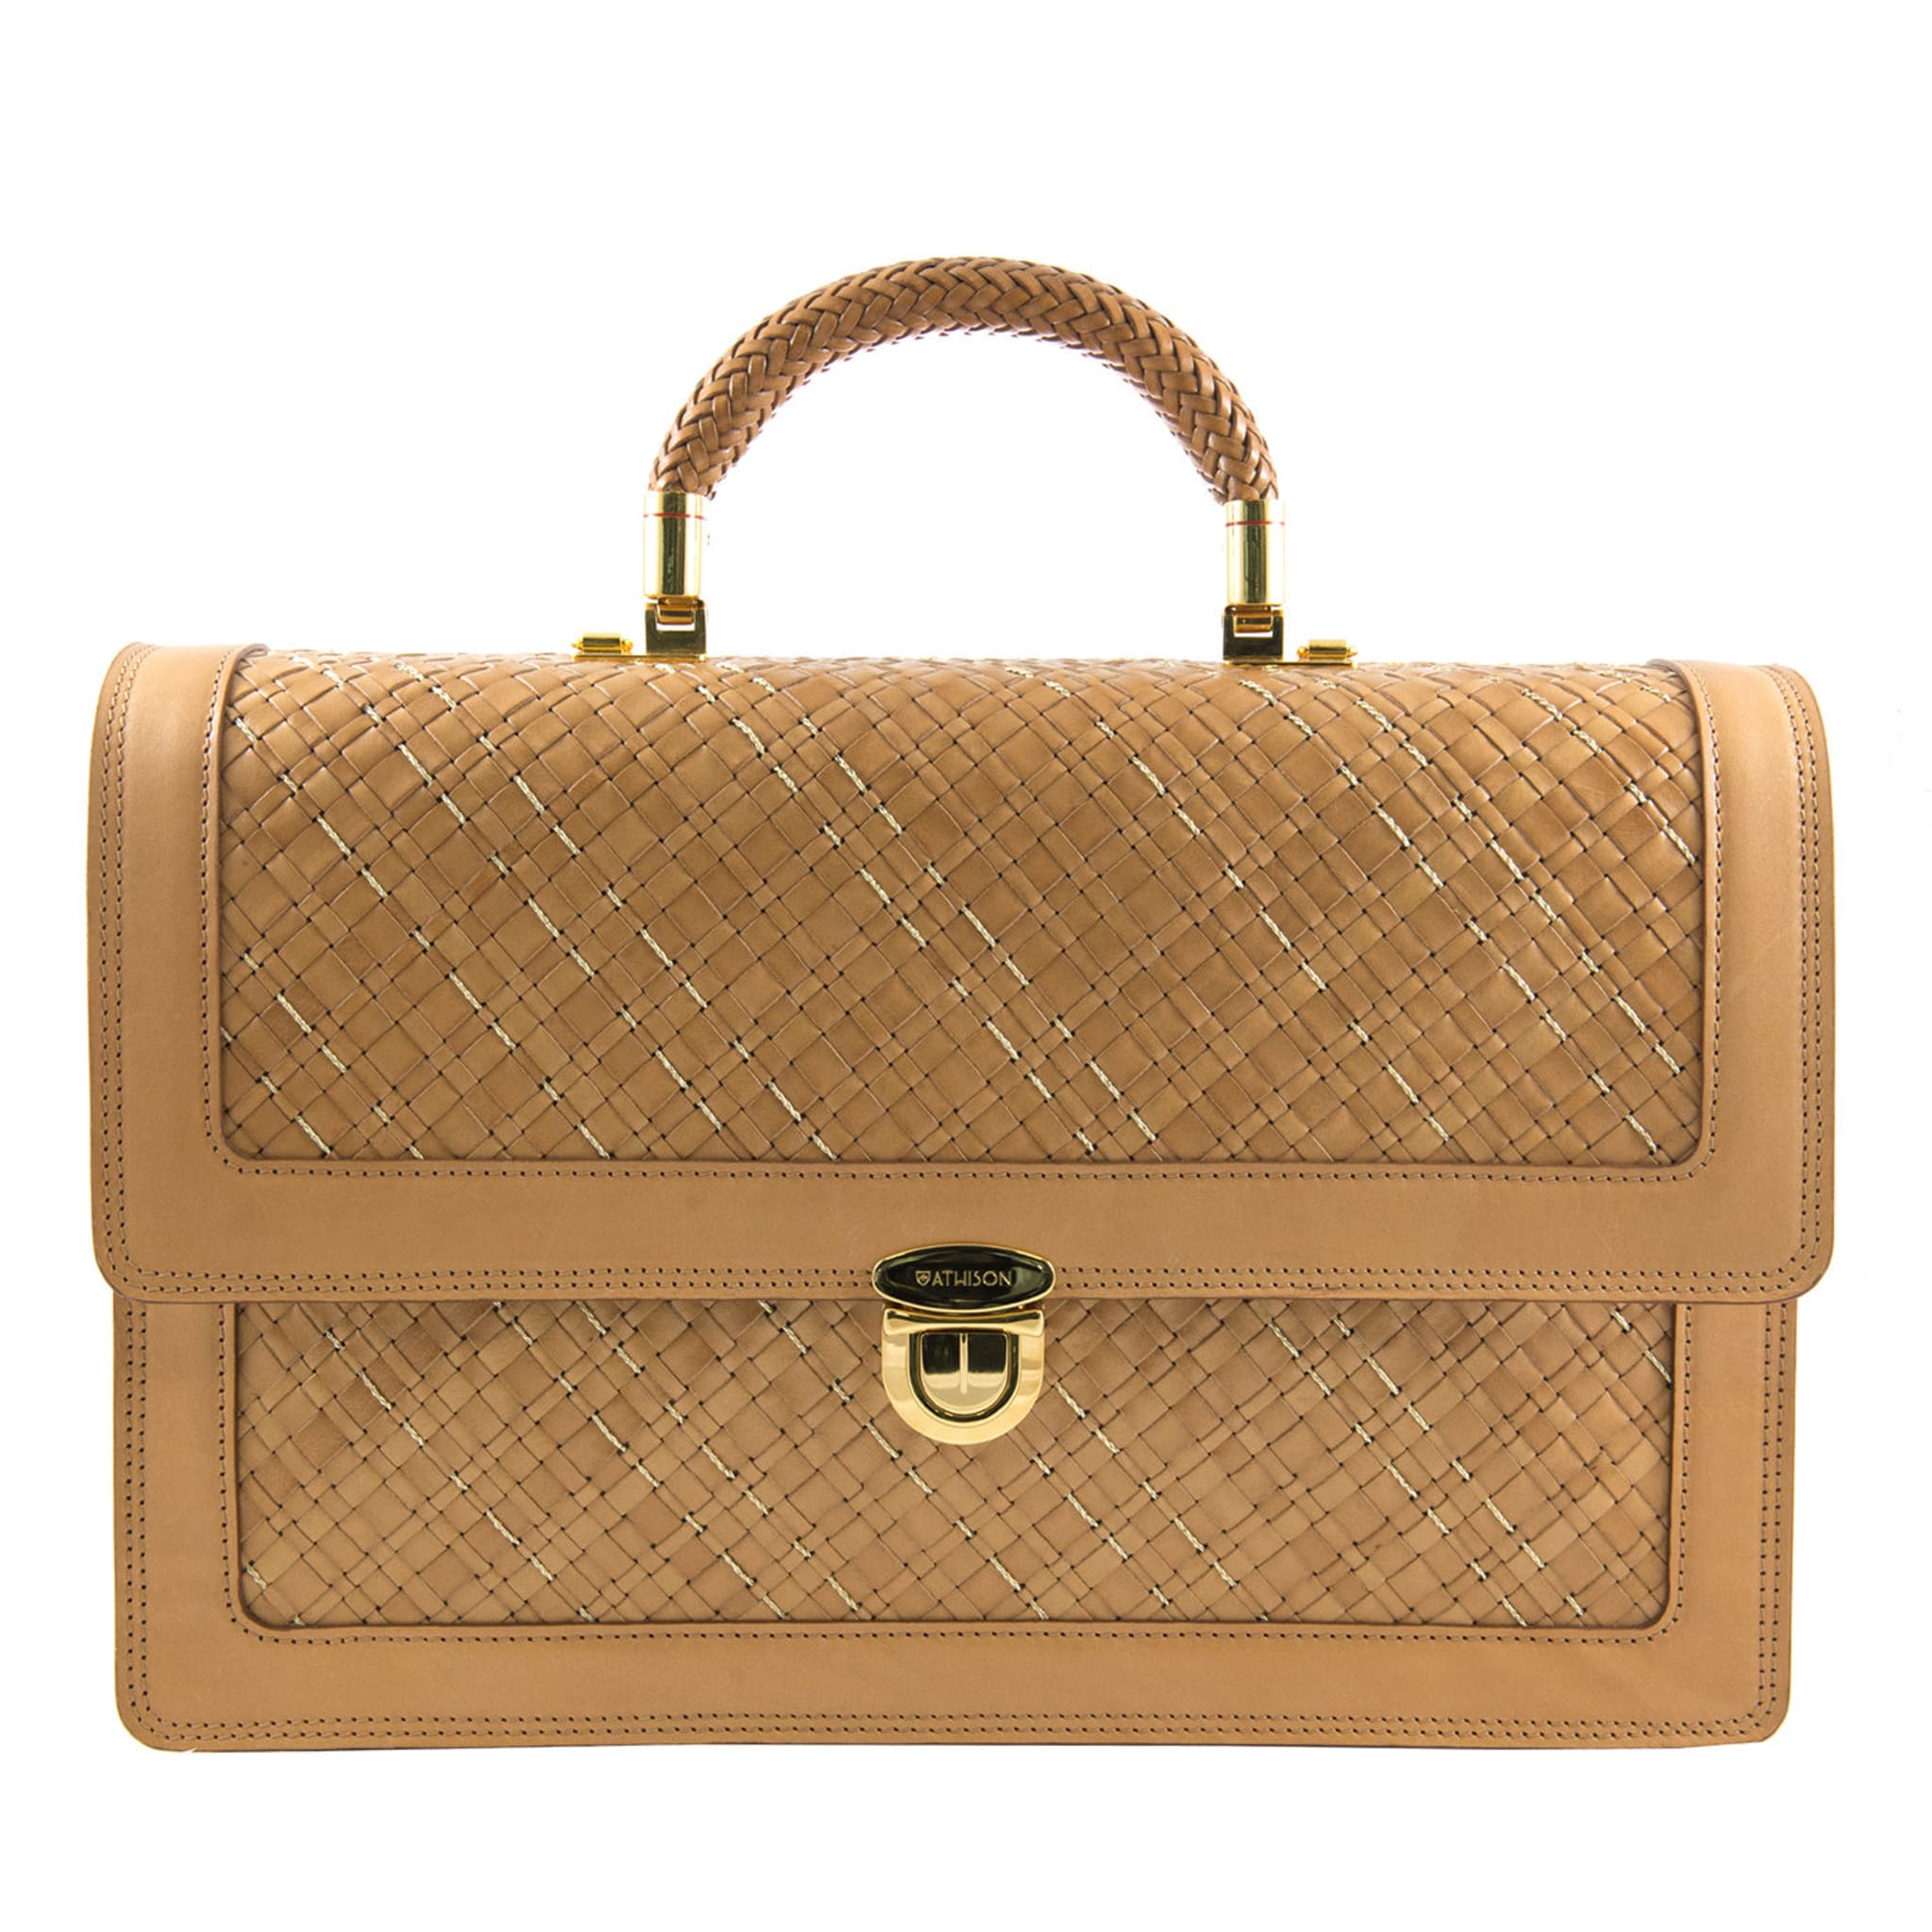 Braided Leather and Copper Business Bag “Kastel” - Beige - Main view